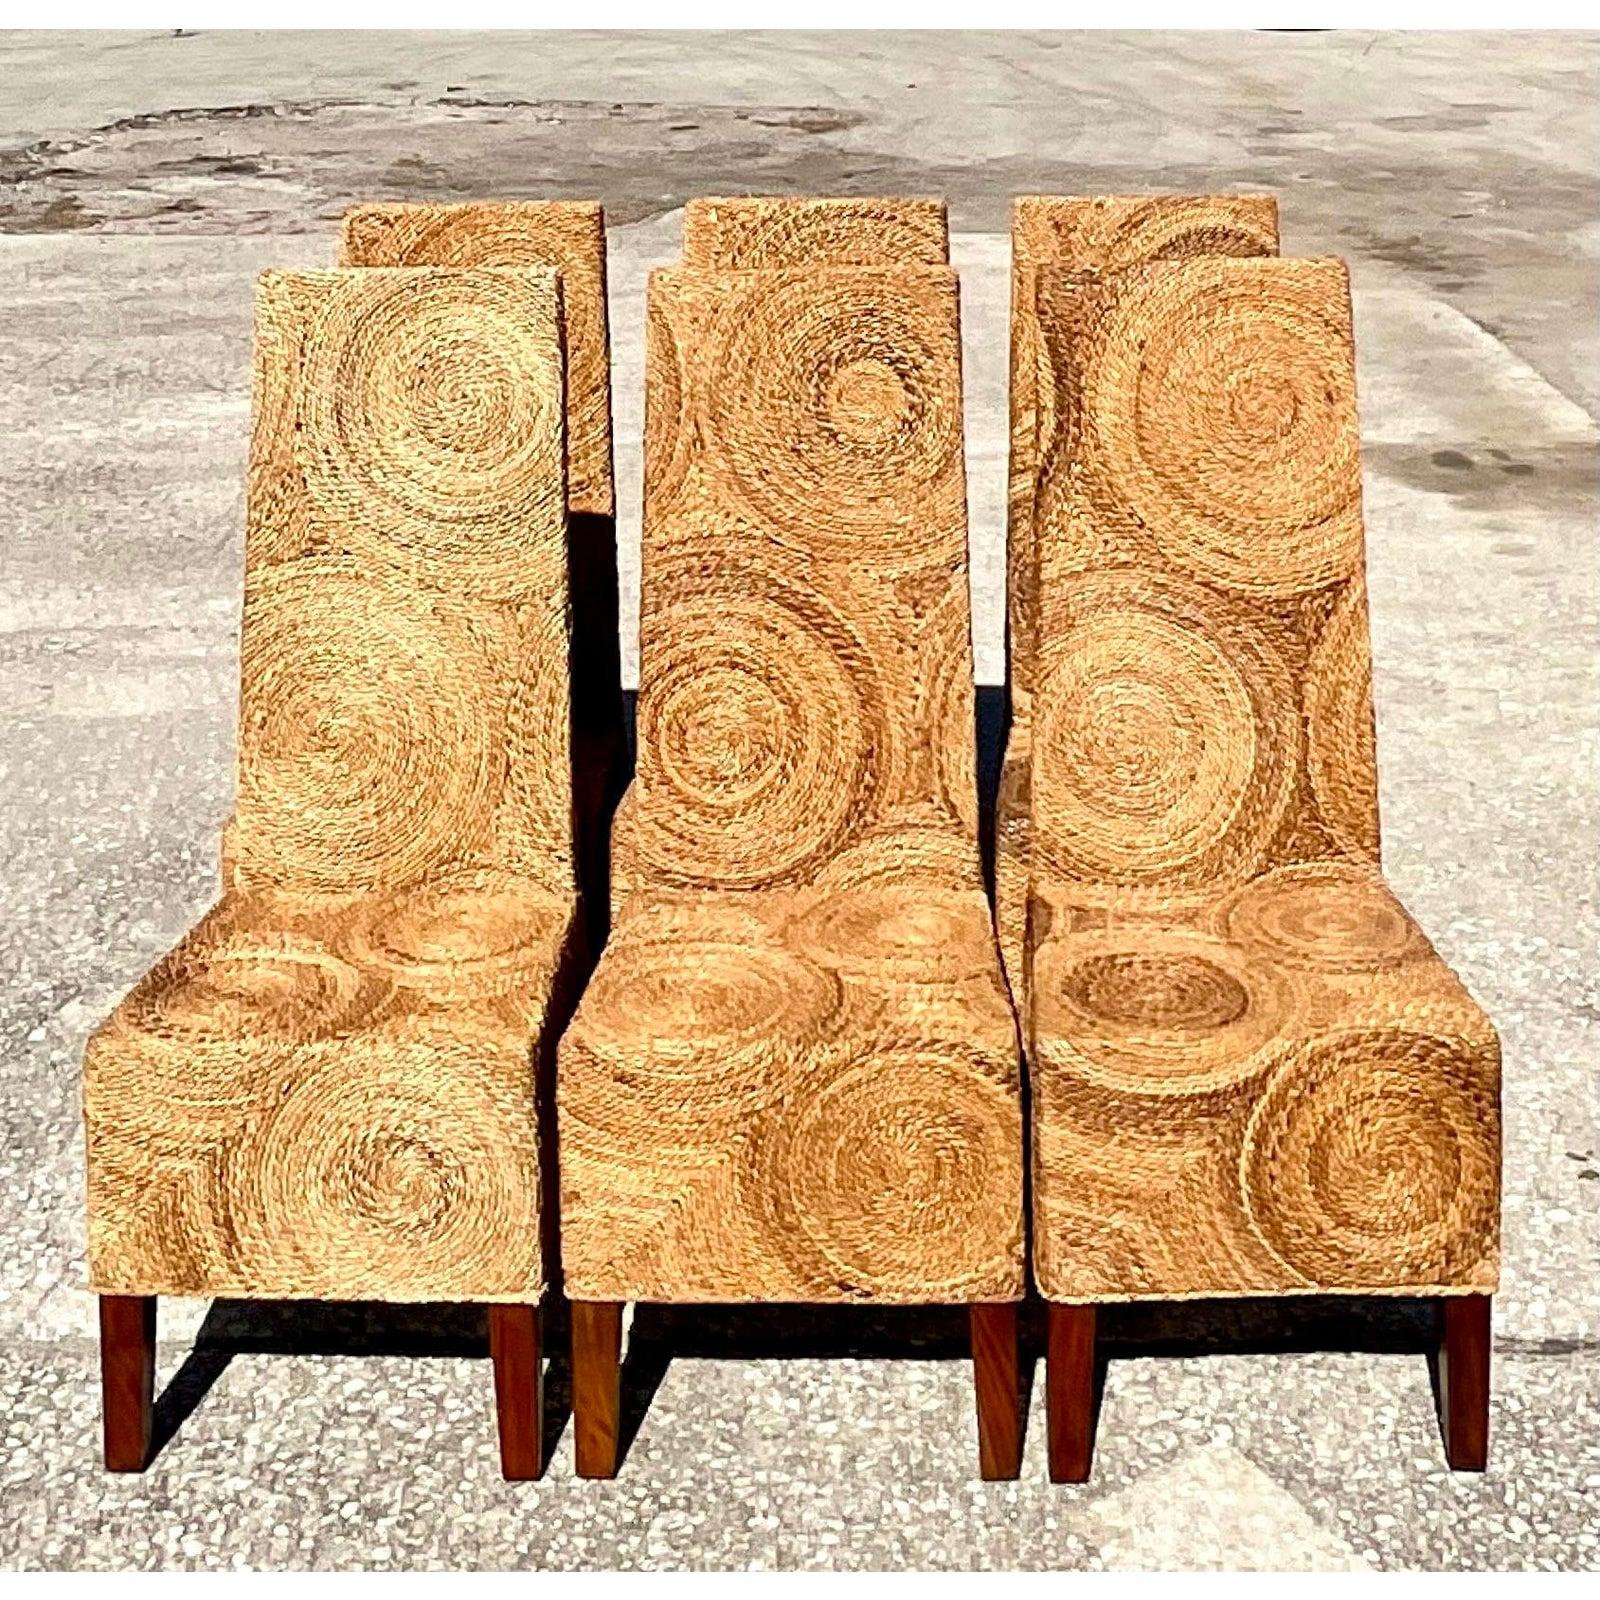 Vintage Coastal Twisted Rattan Circles Dining Chairs - Set of 6 In Good Condition For Sale In west palm beach, FL